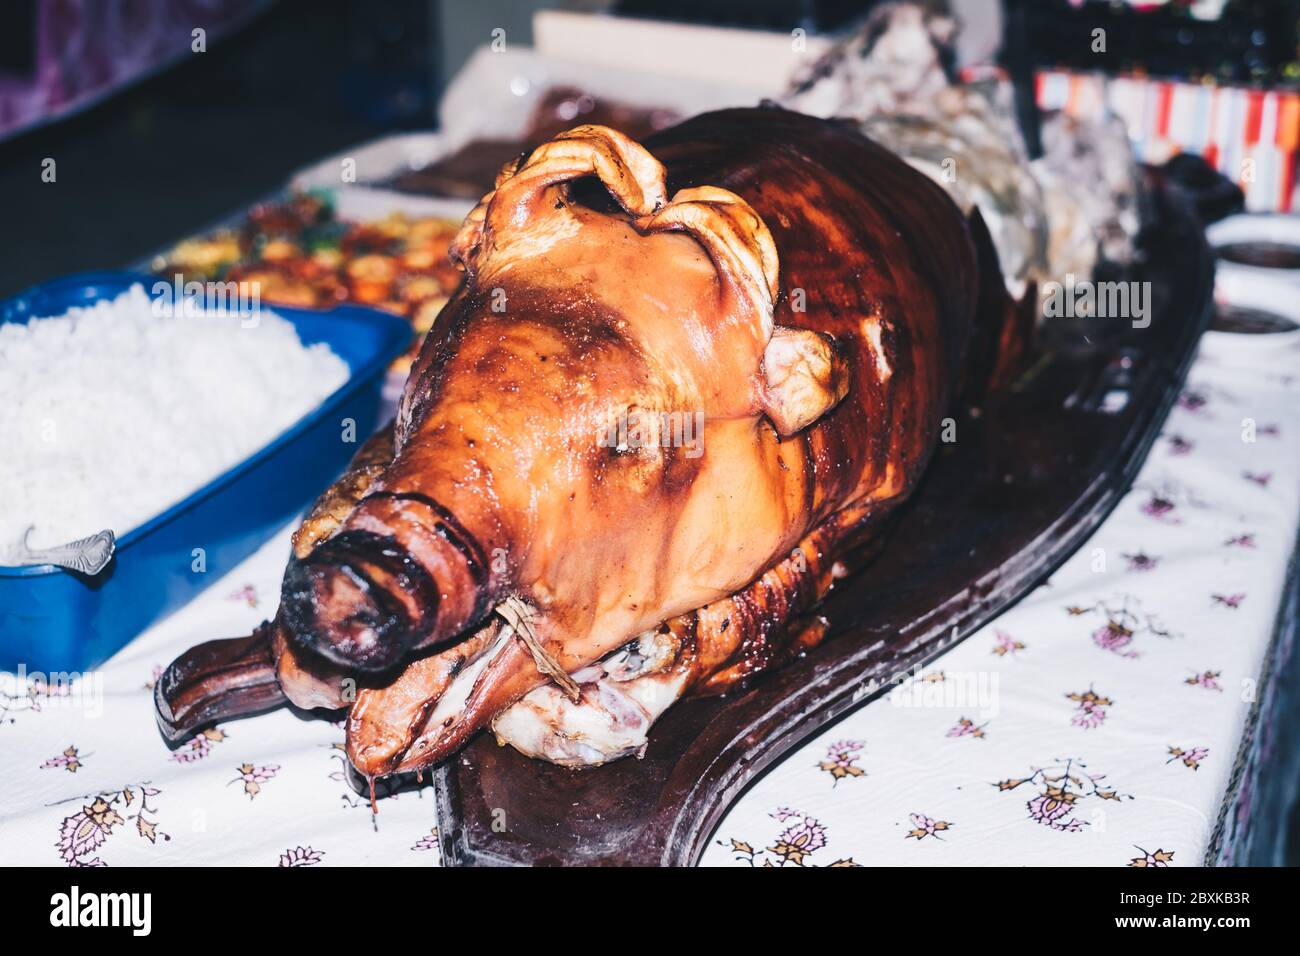 Closeup of semi-frontal view of the popular roasted pig on the table, known as 'lechon' in the Philippines, Spain, Cuba, etc. Selective focus. Stock Photo